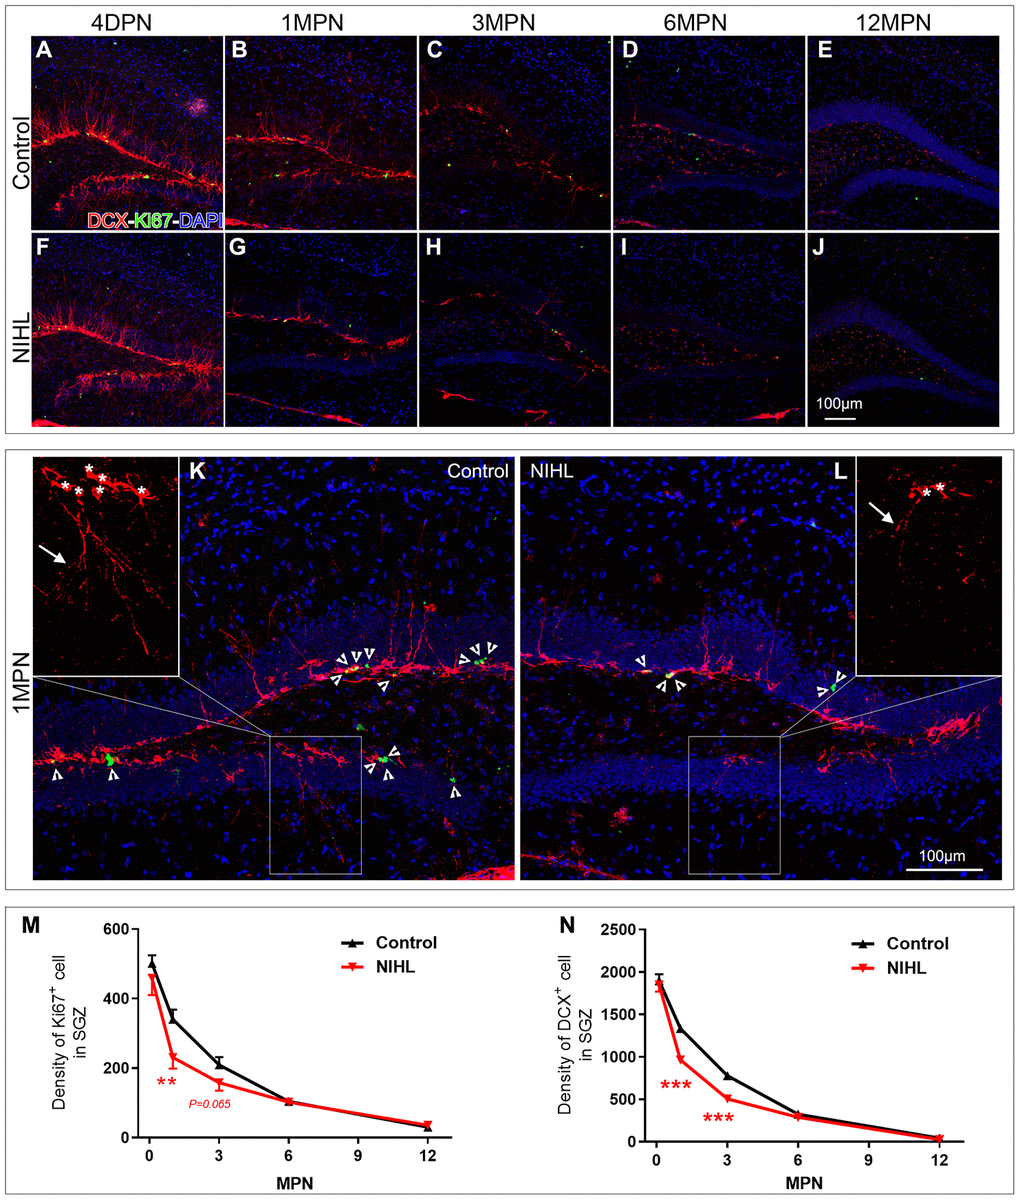 NIHL mice exhibited an accelerated age-related decline in hippocampal neurogenesis. (A–J) Representative images of Ki67+ (green) and DCX+ (red) cells in the hippocampal DG of control and NIHL mice at 4 DPN (A, F), 1 MPN (B, G), 3 MPN (C, H), 6 MPN (D, I) and 12 MPN (E, J). Note the accumulation of autofluorescent lipofuscin deposits (red), a sign of normal senescence [43], in the DG of control and NIHL mice at 6 MPN and 12 MPN. Scale bar: 100 μm. (K, L) Enlarged views of B (K, flipped horizontally) and G (L). Arrowheads indicate Ki67+ (green) cells. Asterisks and arrows in the magnified inserts indicate the soma and processes of DCX+ cells (red). Note the obvious reduction in branch complexity of DCX+ cells in NIHL mice. Scale bar: 100 μm. (M, N) Quantitative analyses of Ki67+ cells (M) and DCX+ cells (N) in the DG of mice at different time points. **Ppost hoc Tukey’s test, vs. age-matched control group).